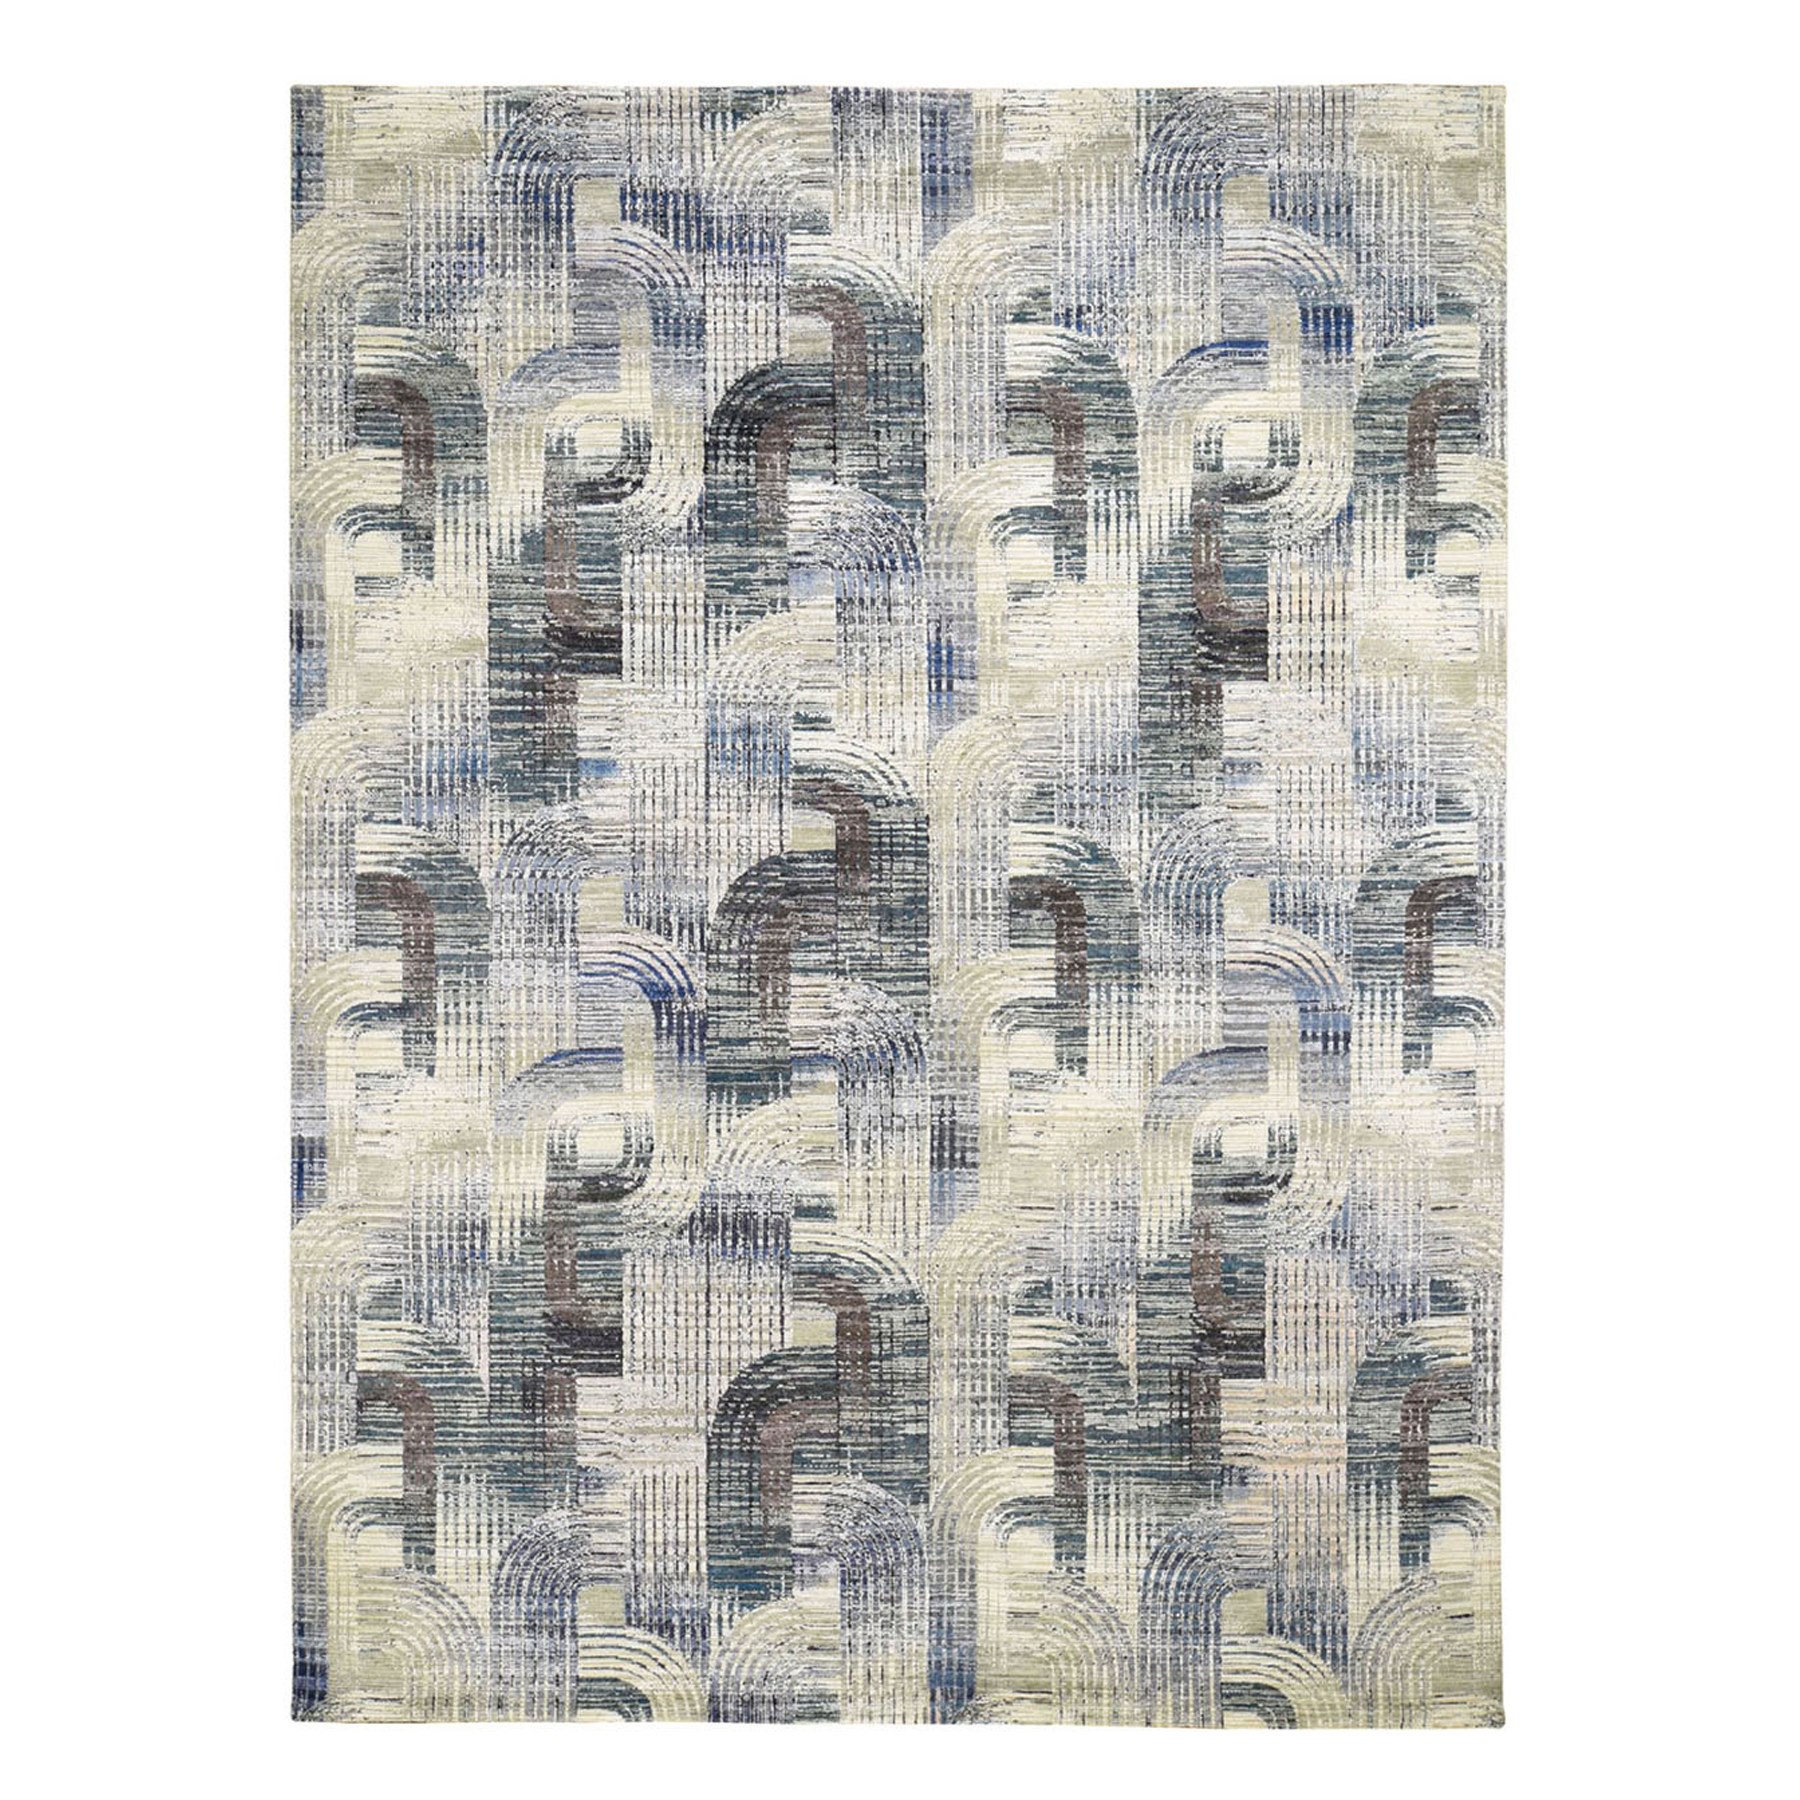 9'x12'3" THE INTERTWINED PASSAGE, Silk with Textured Wool Hand Woven Oriental Rug 